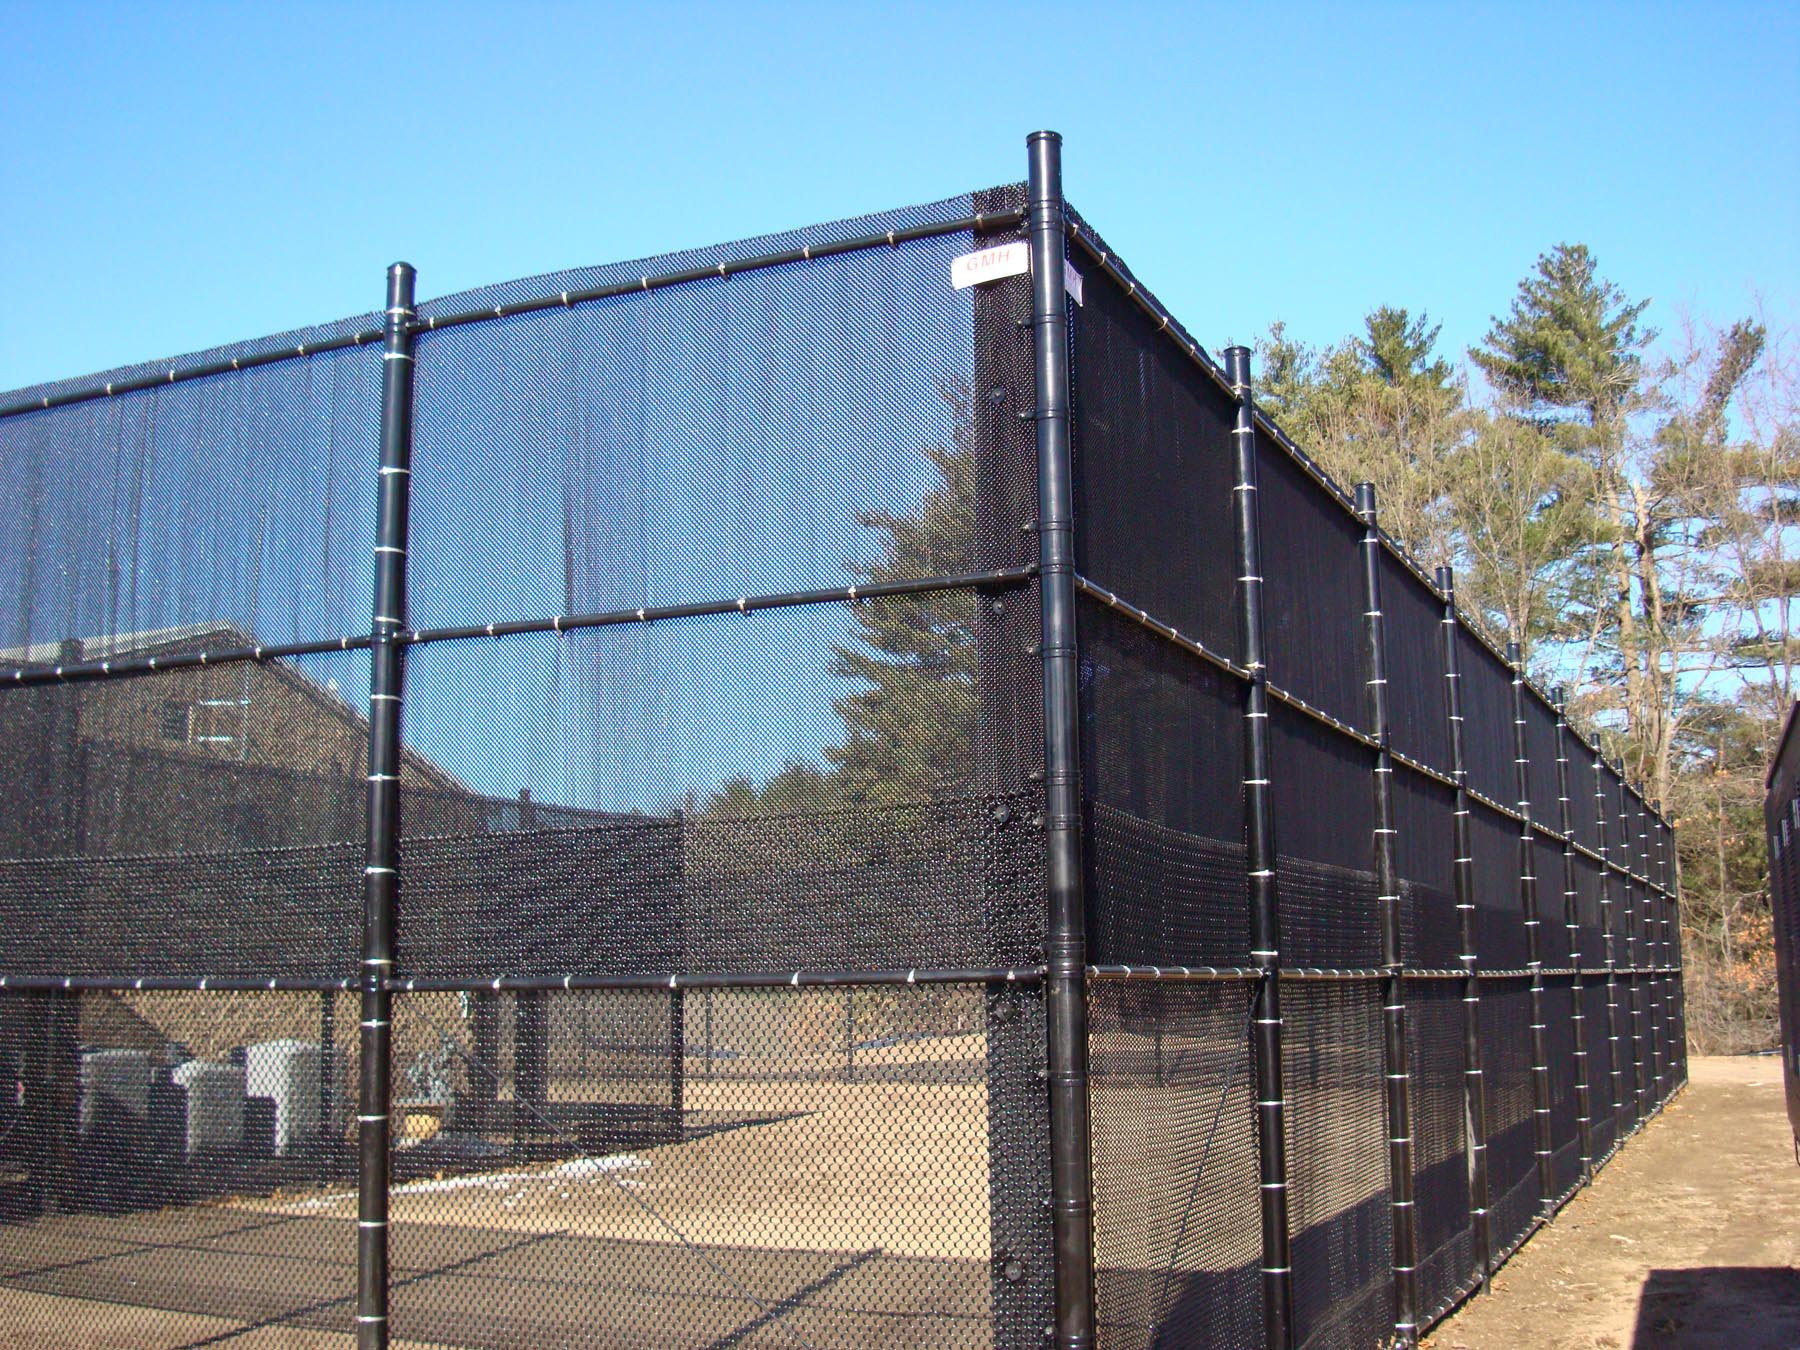 Great Uses for Ornamental Fences - Paramount Fence